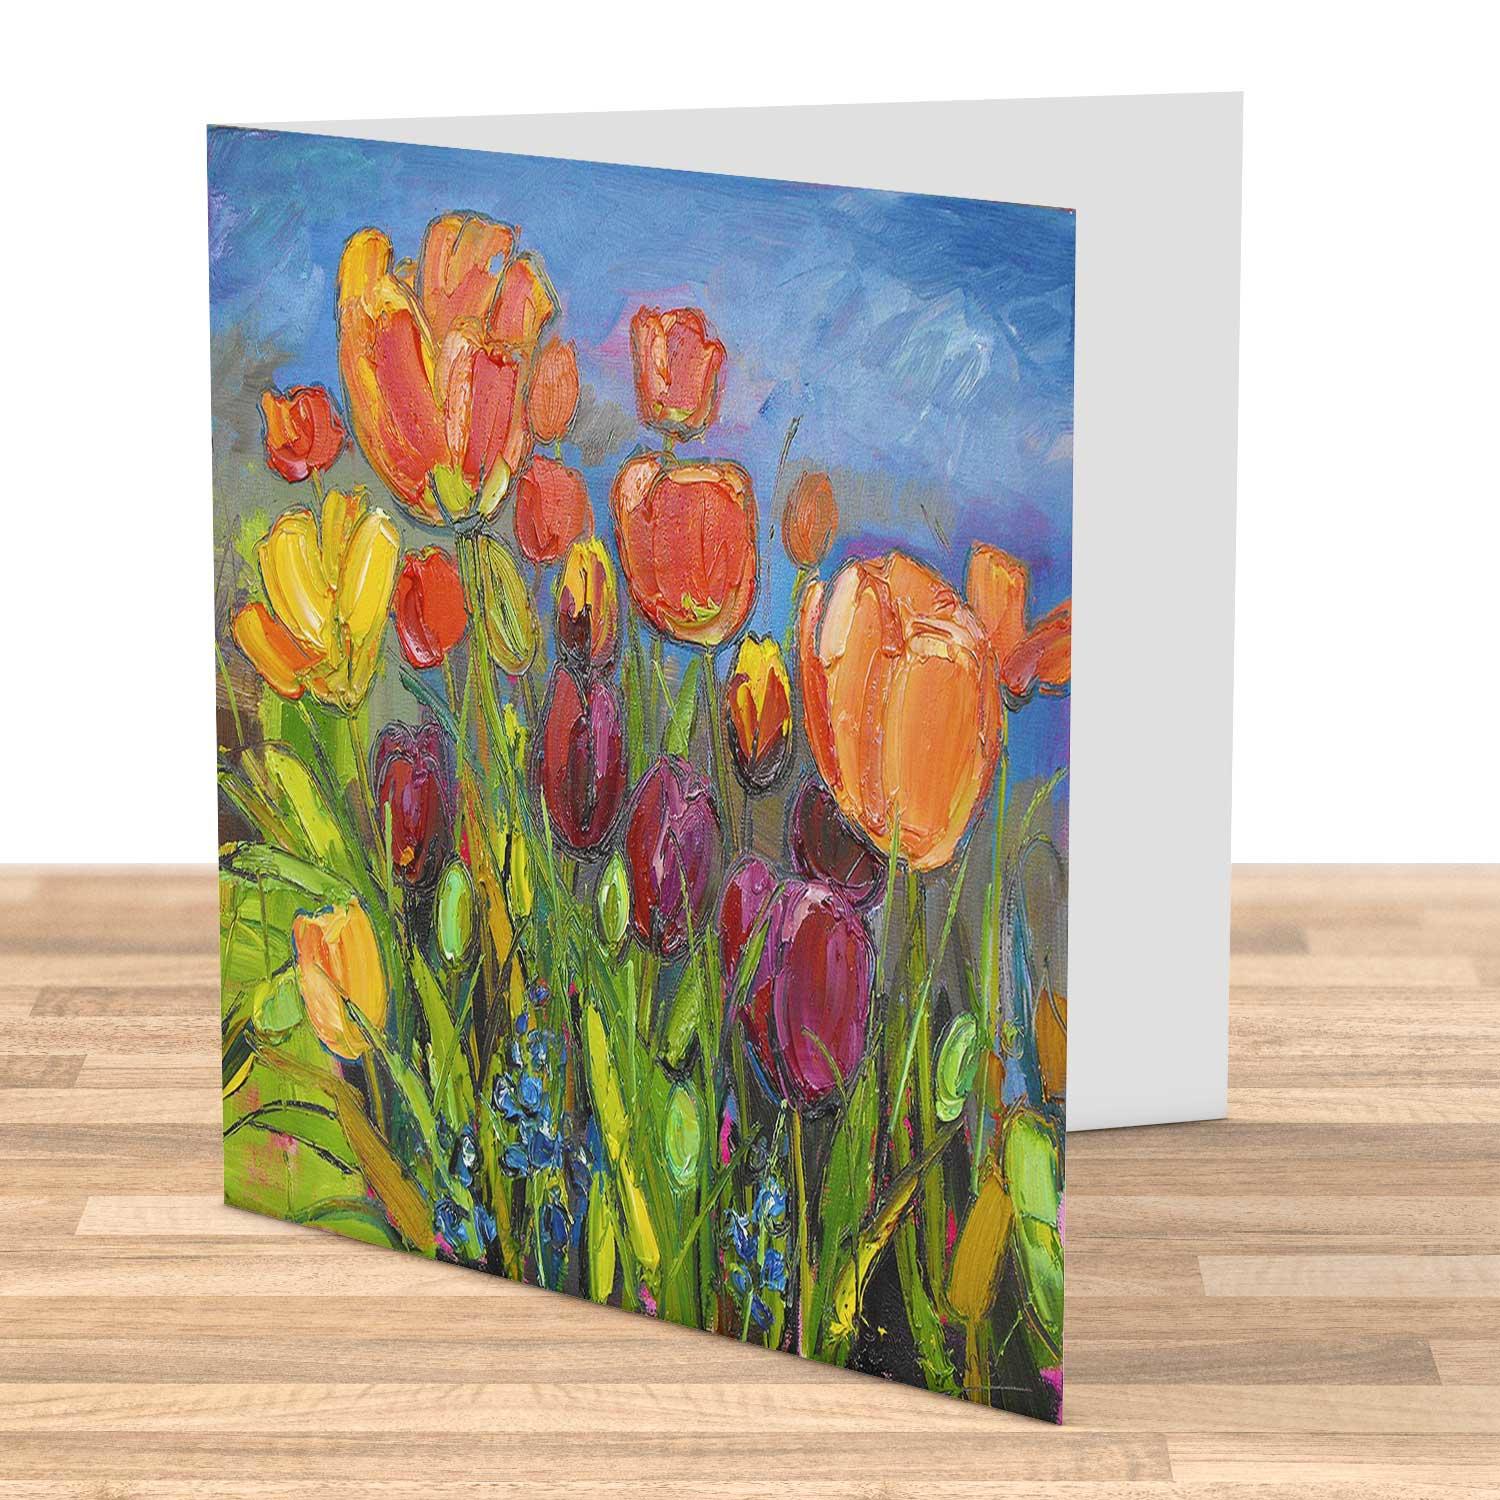 Blue Sky with Tulips Greeting Card from an original painting by artist Judith I Bridgland